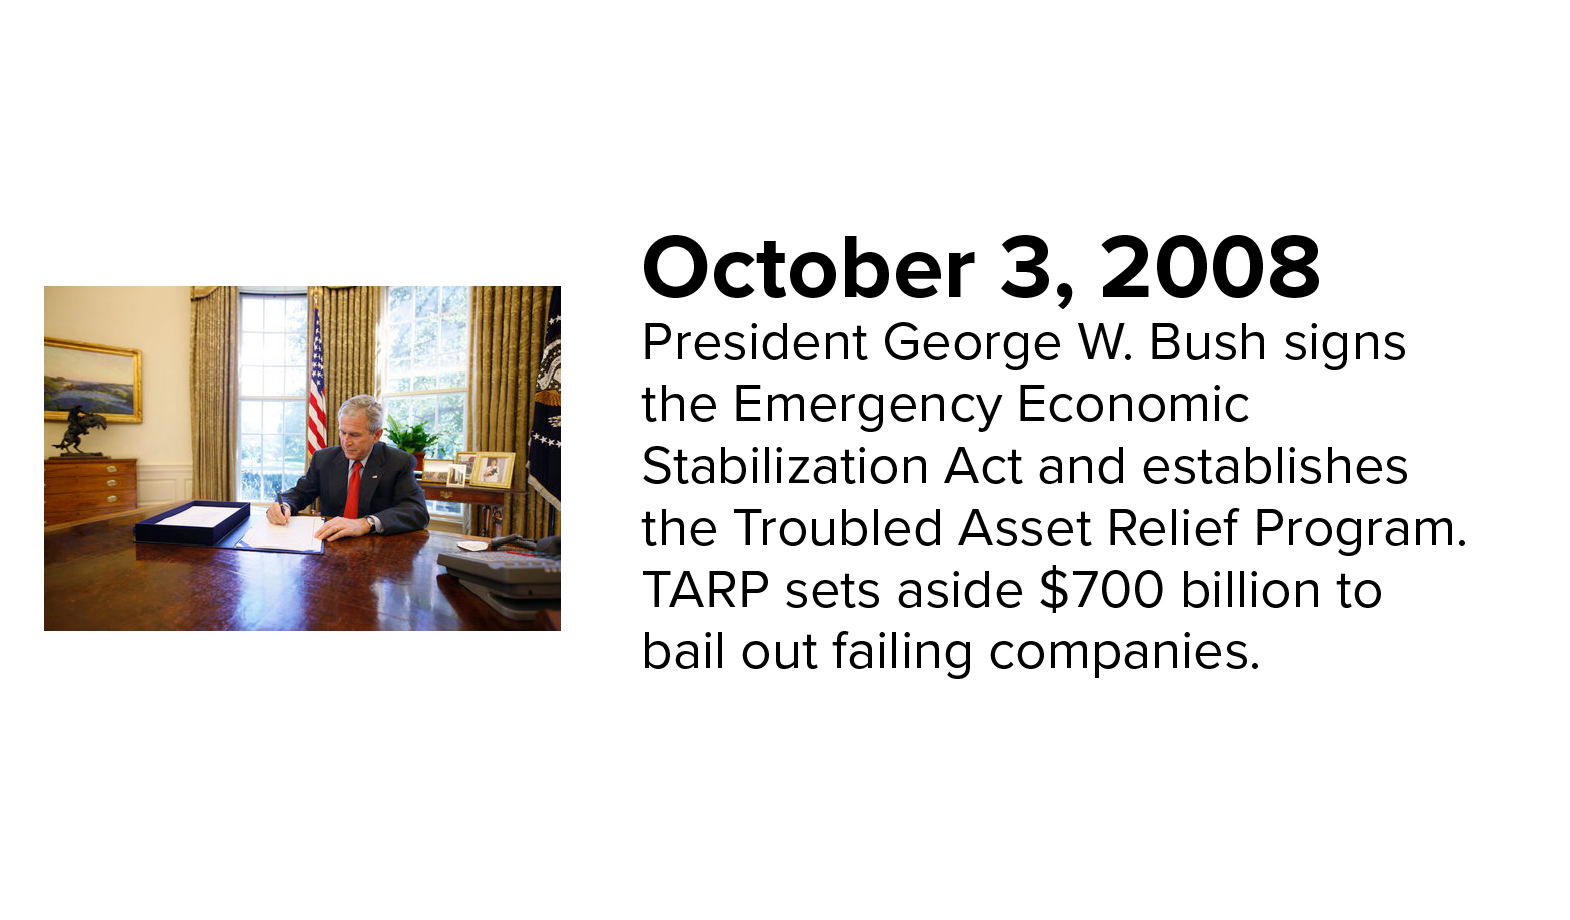 Photo of President George W. Bush signing the Emergency Economic Stabilization Act, which set aside $700 billion to bail out failing companies. 